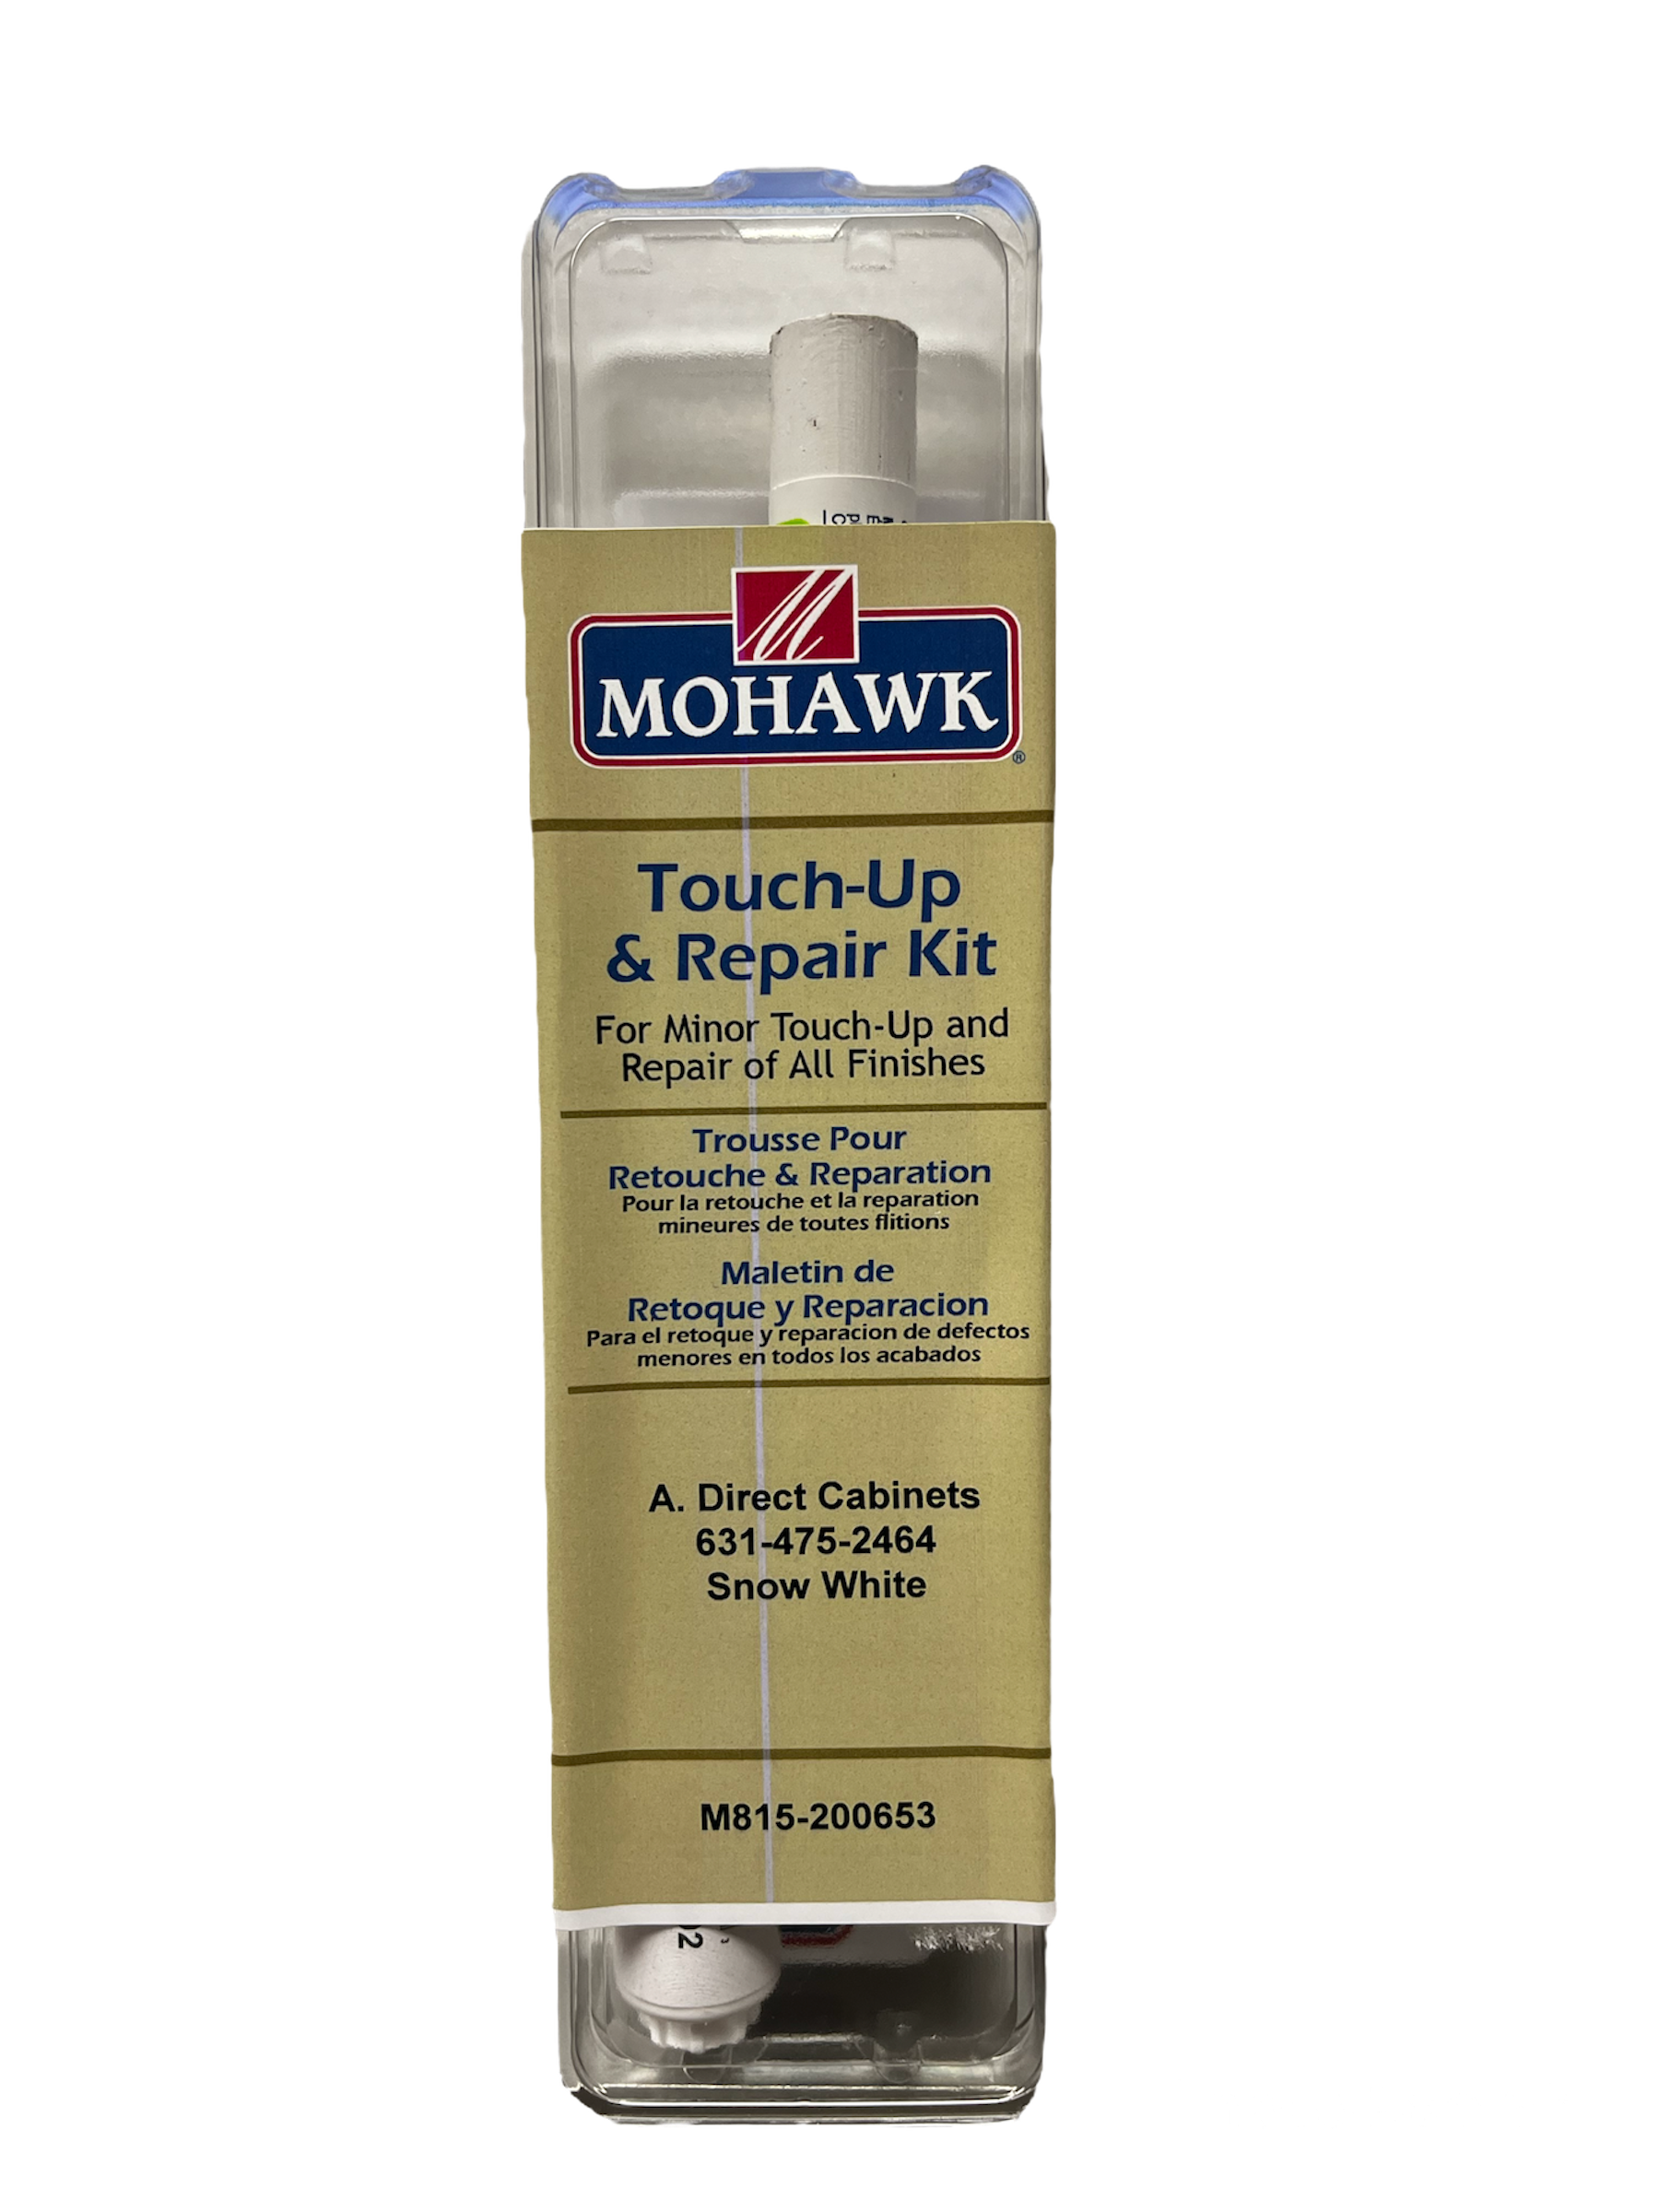 Mantra Snow (White Paint) Touch-Up & Repair Kit for Mantra Cabinets-DirectCabinets.com